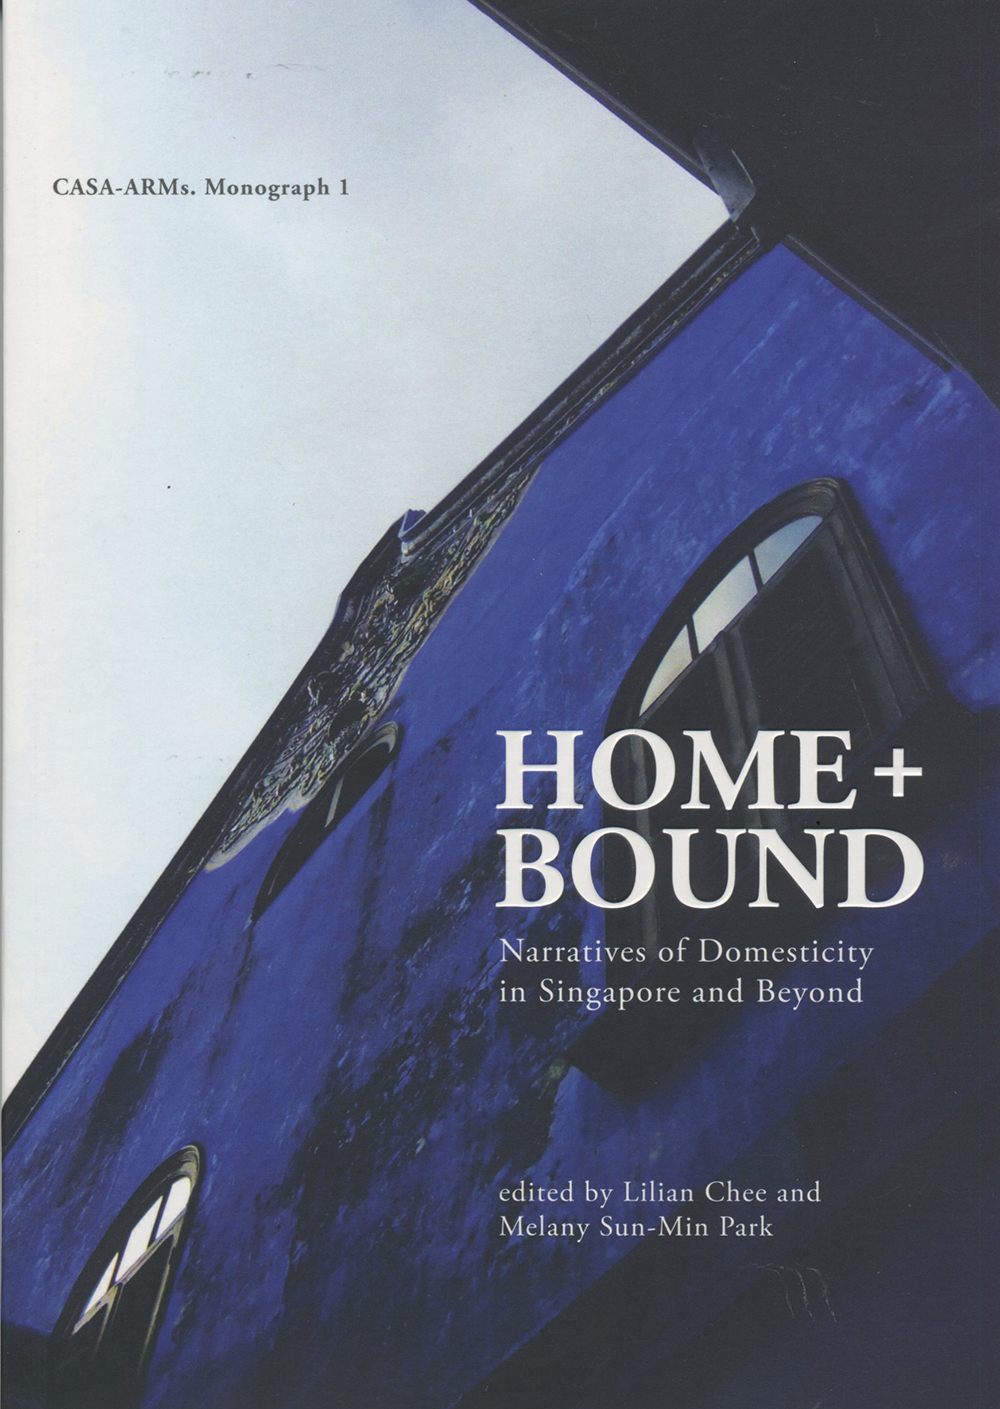 HOME + BOUND: Narratives of Domesticity in Singapore and Beyond